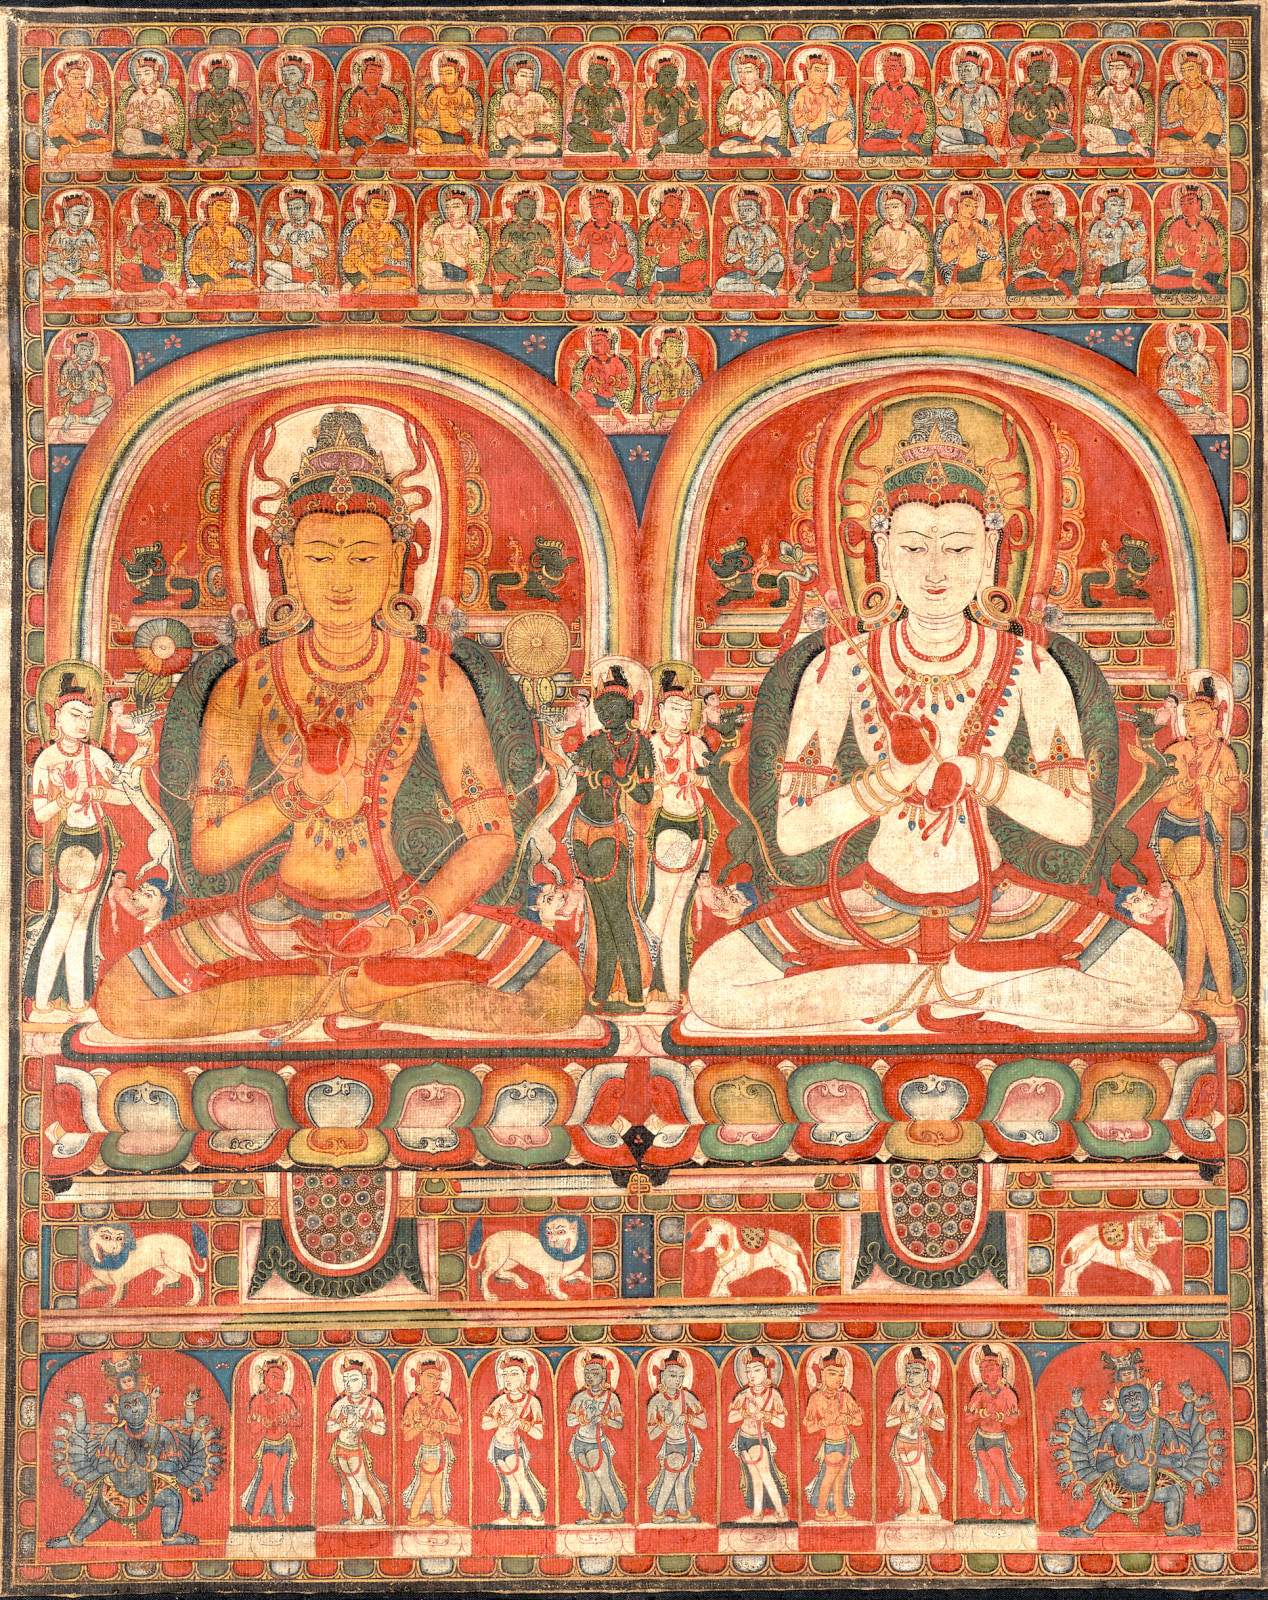 This rare Tibetan thangka is from a set of at least two paintings depicting the Four Transcendent Lords of the Bon religion